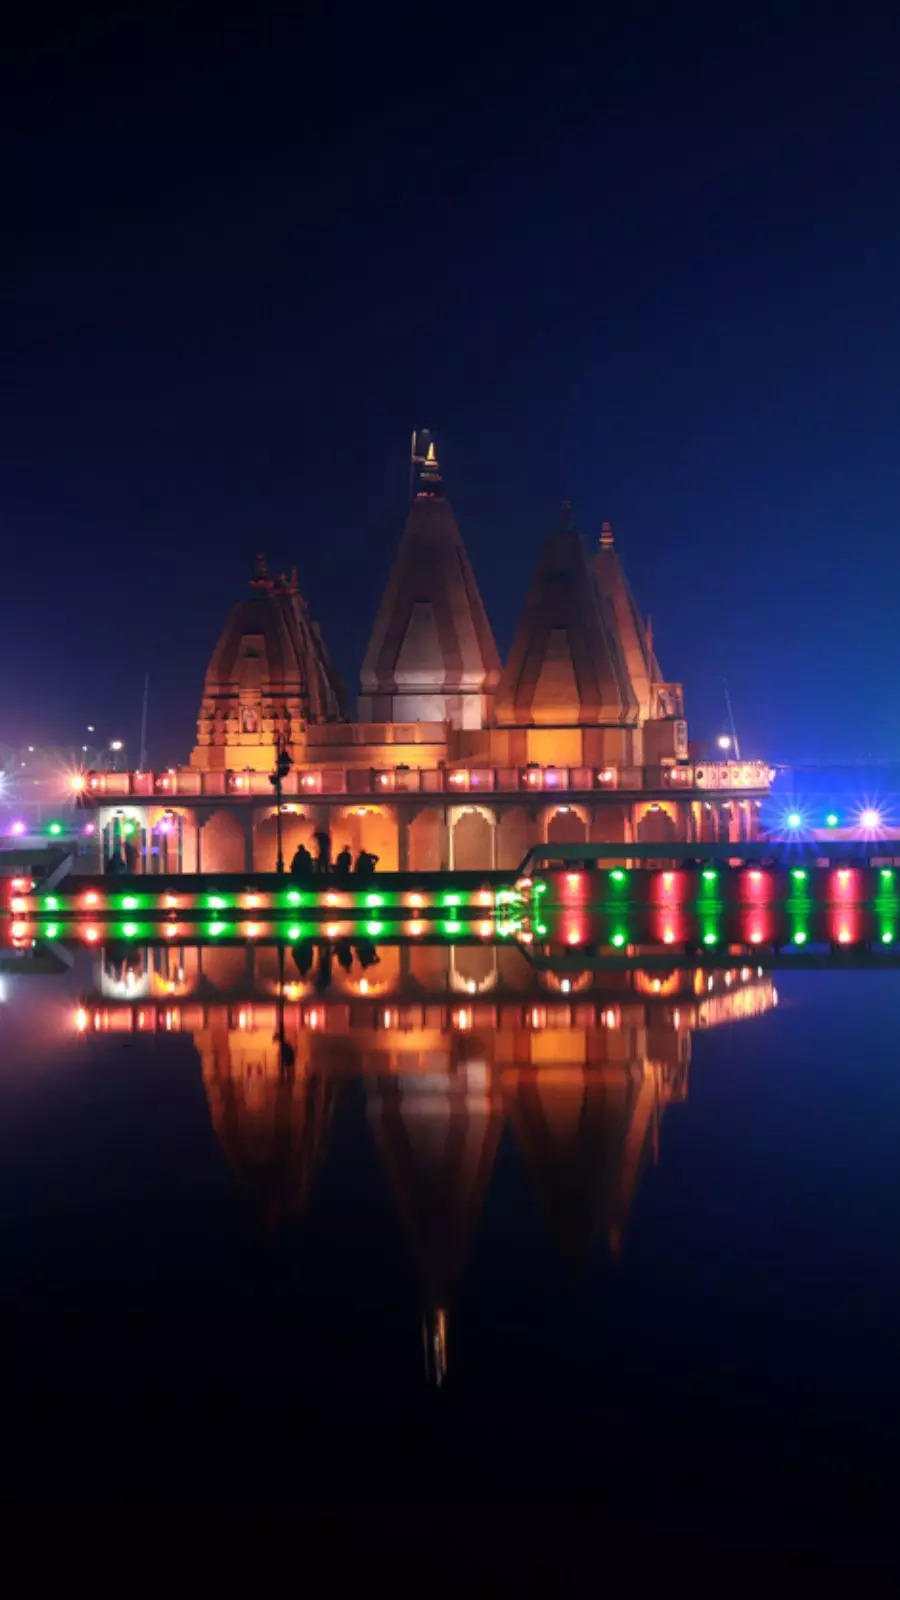 Known for its religious significance in Hindu mythology, Kurukshetra hosts the Mahabharata war and is dotted with ancient temples and historical sites.